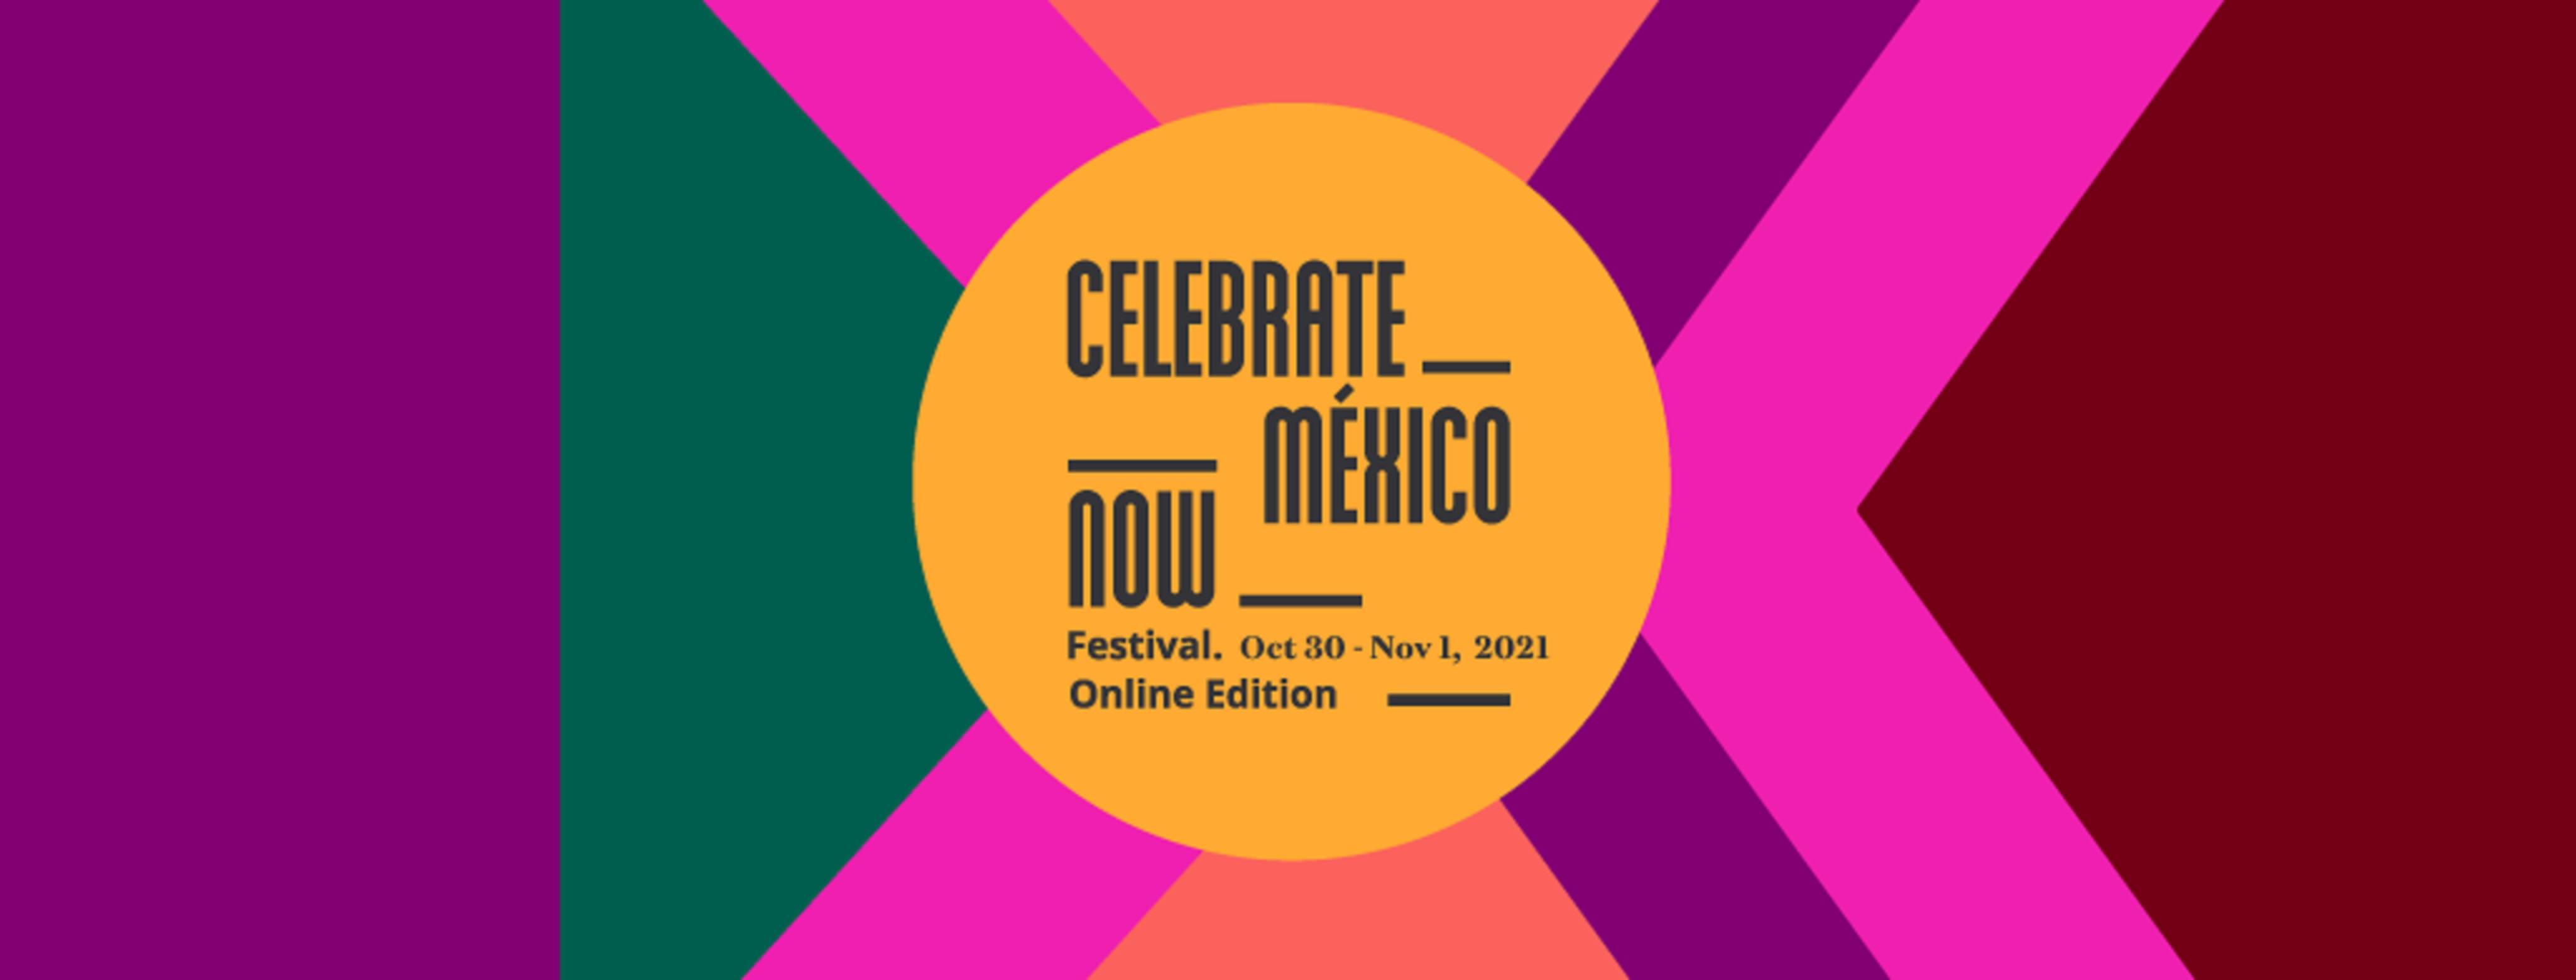 Celebrate Mexico Now - A Streaming Celebration of Mexican Music, Dance, Film, History and Business